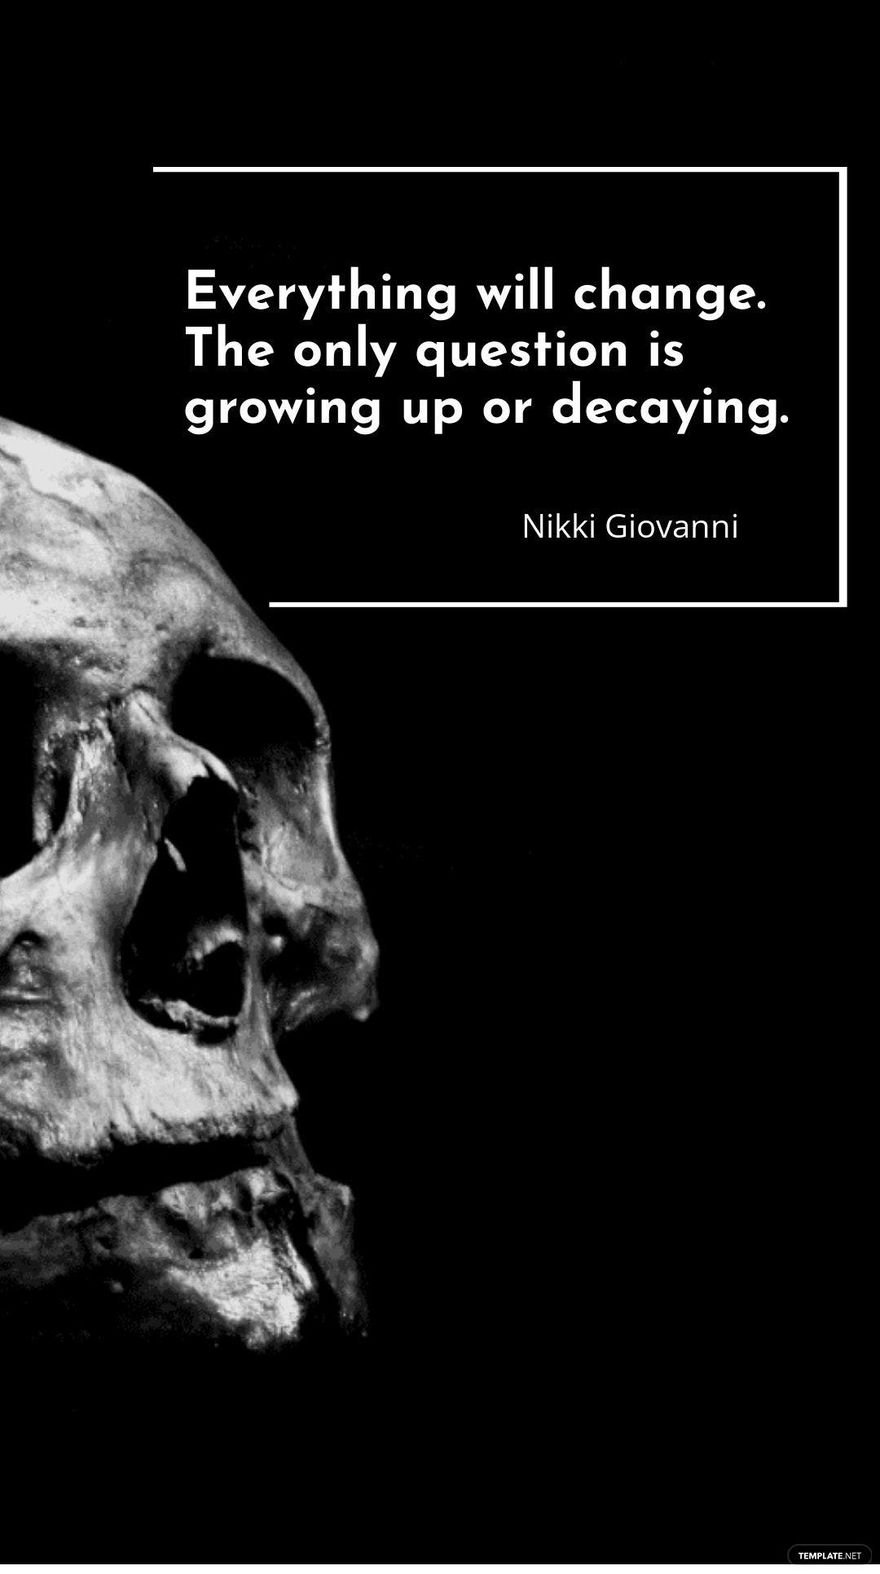 Nikki Giovanni - Everything will change. The only question is growing up or decaying. in JPG